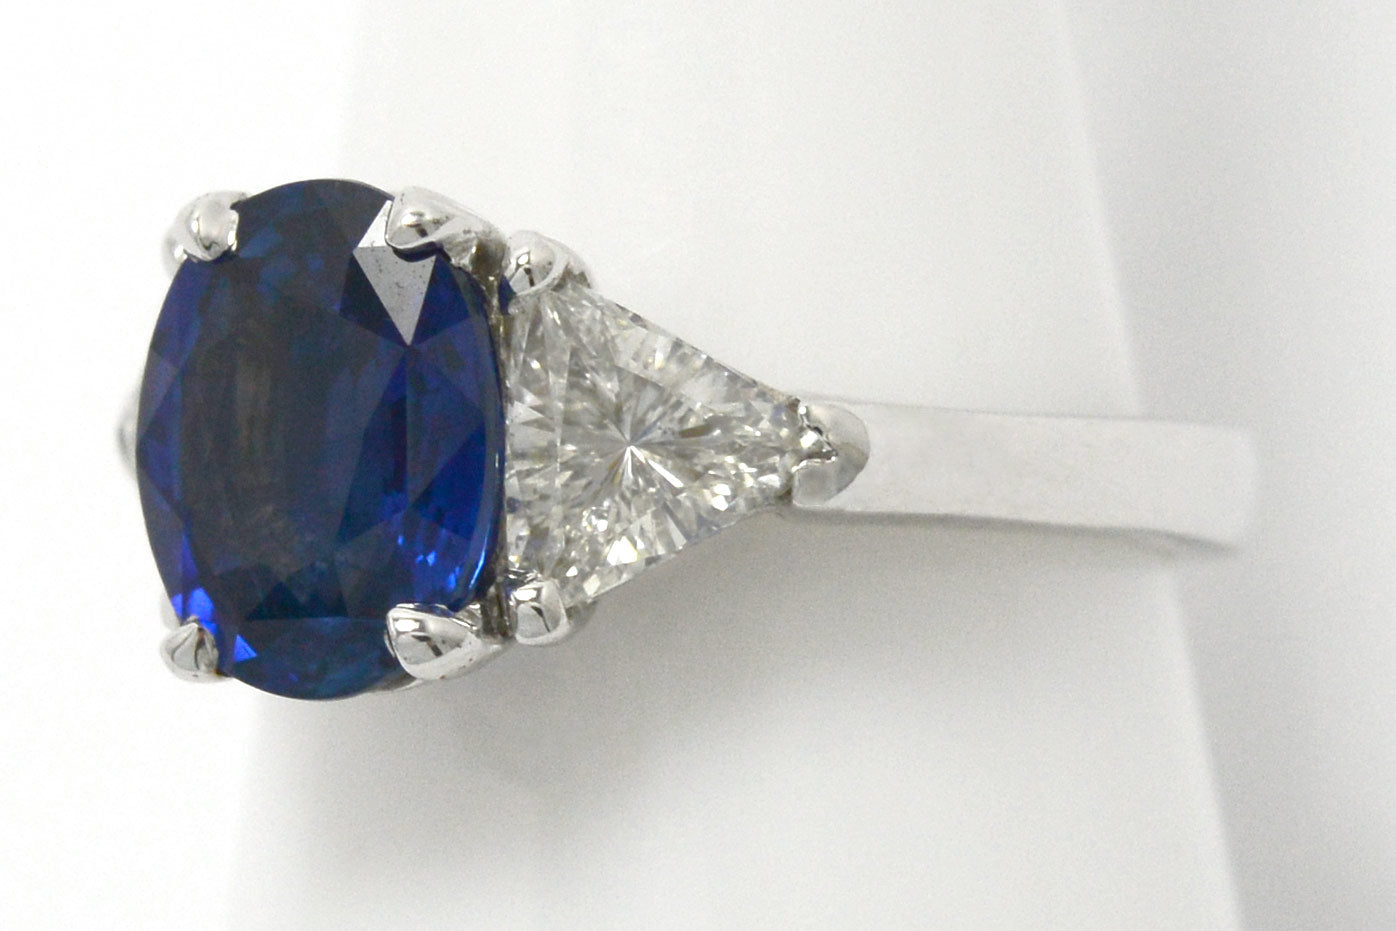 1.50 carats of trillion cut diamonds support this large ceylon sapphire engagement ring.